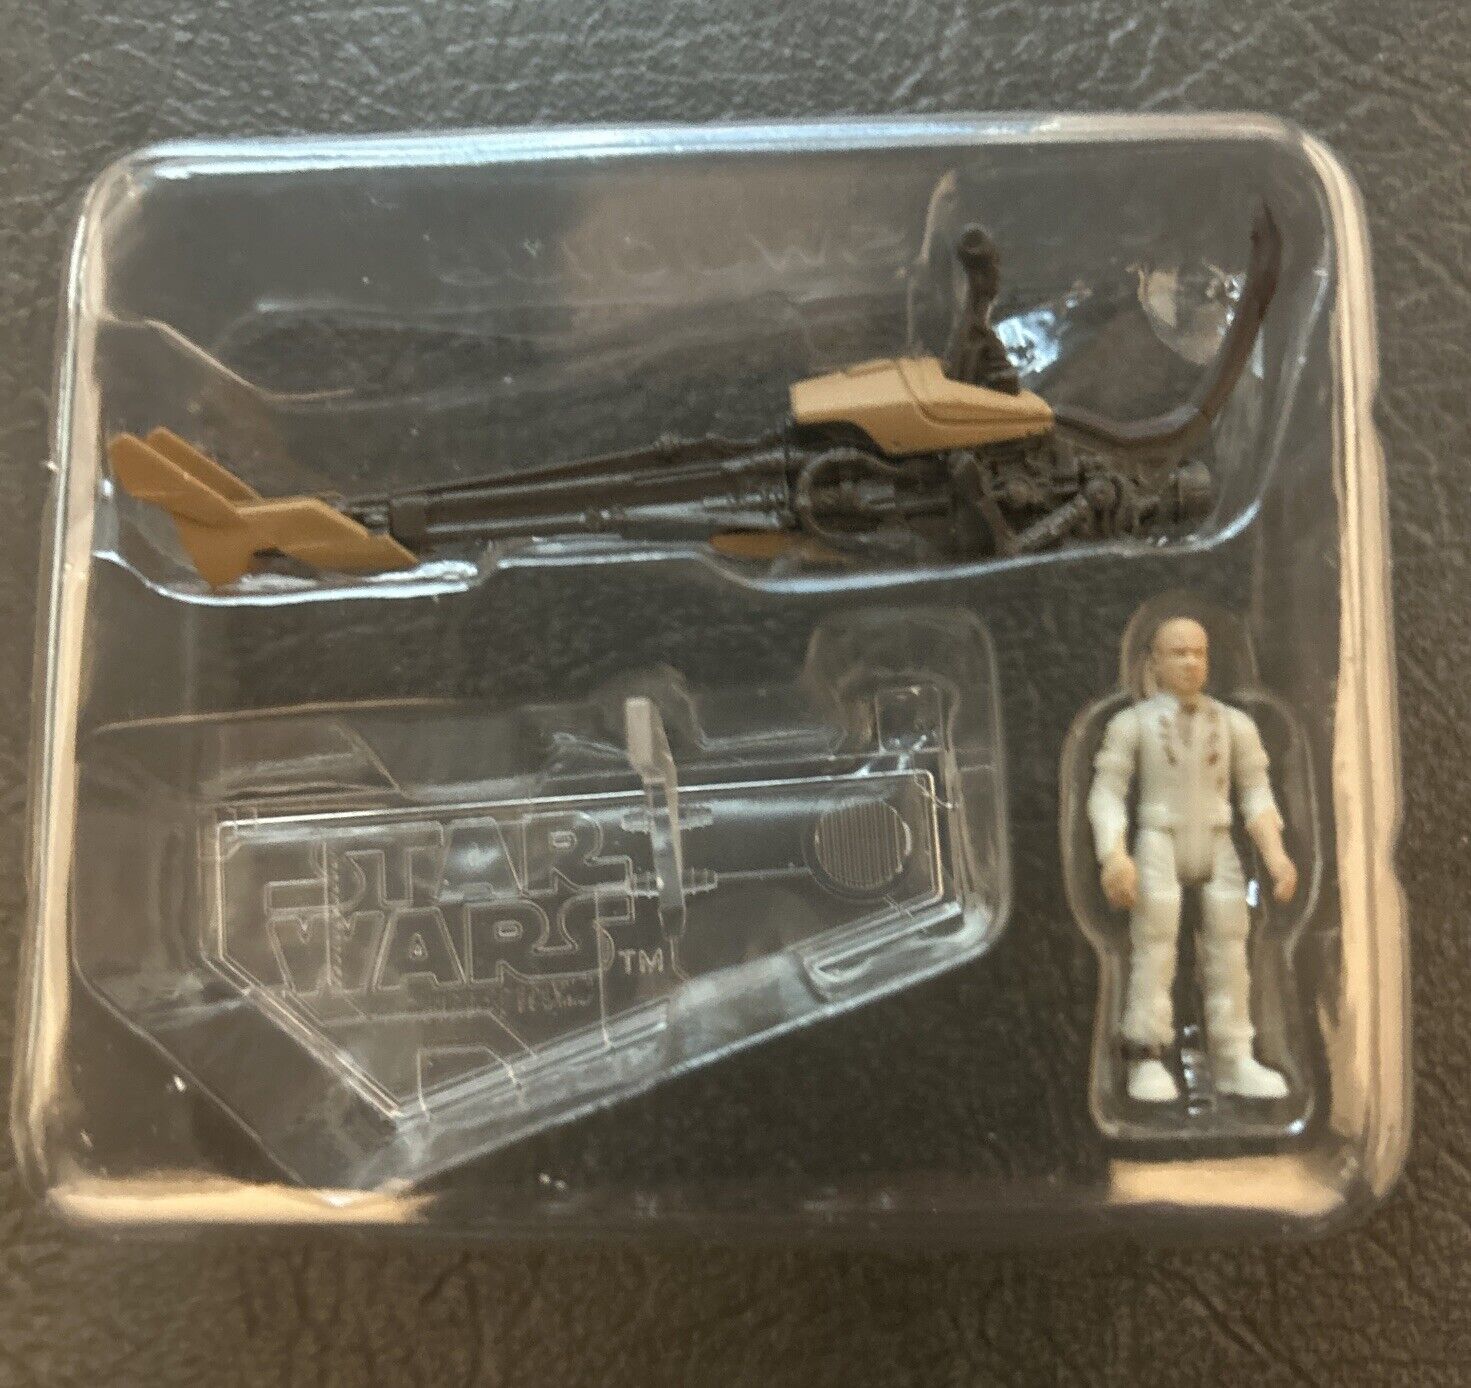 Star Wars Micro Galaxy Squadron Series 5 Scout Class  Boba Fett/Speeder CHASE